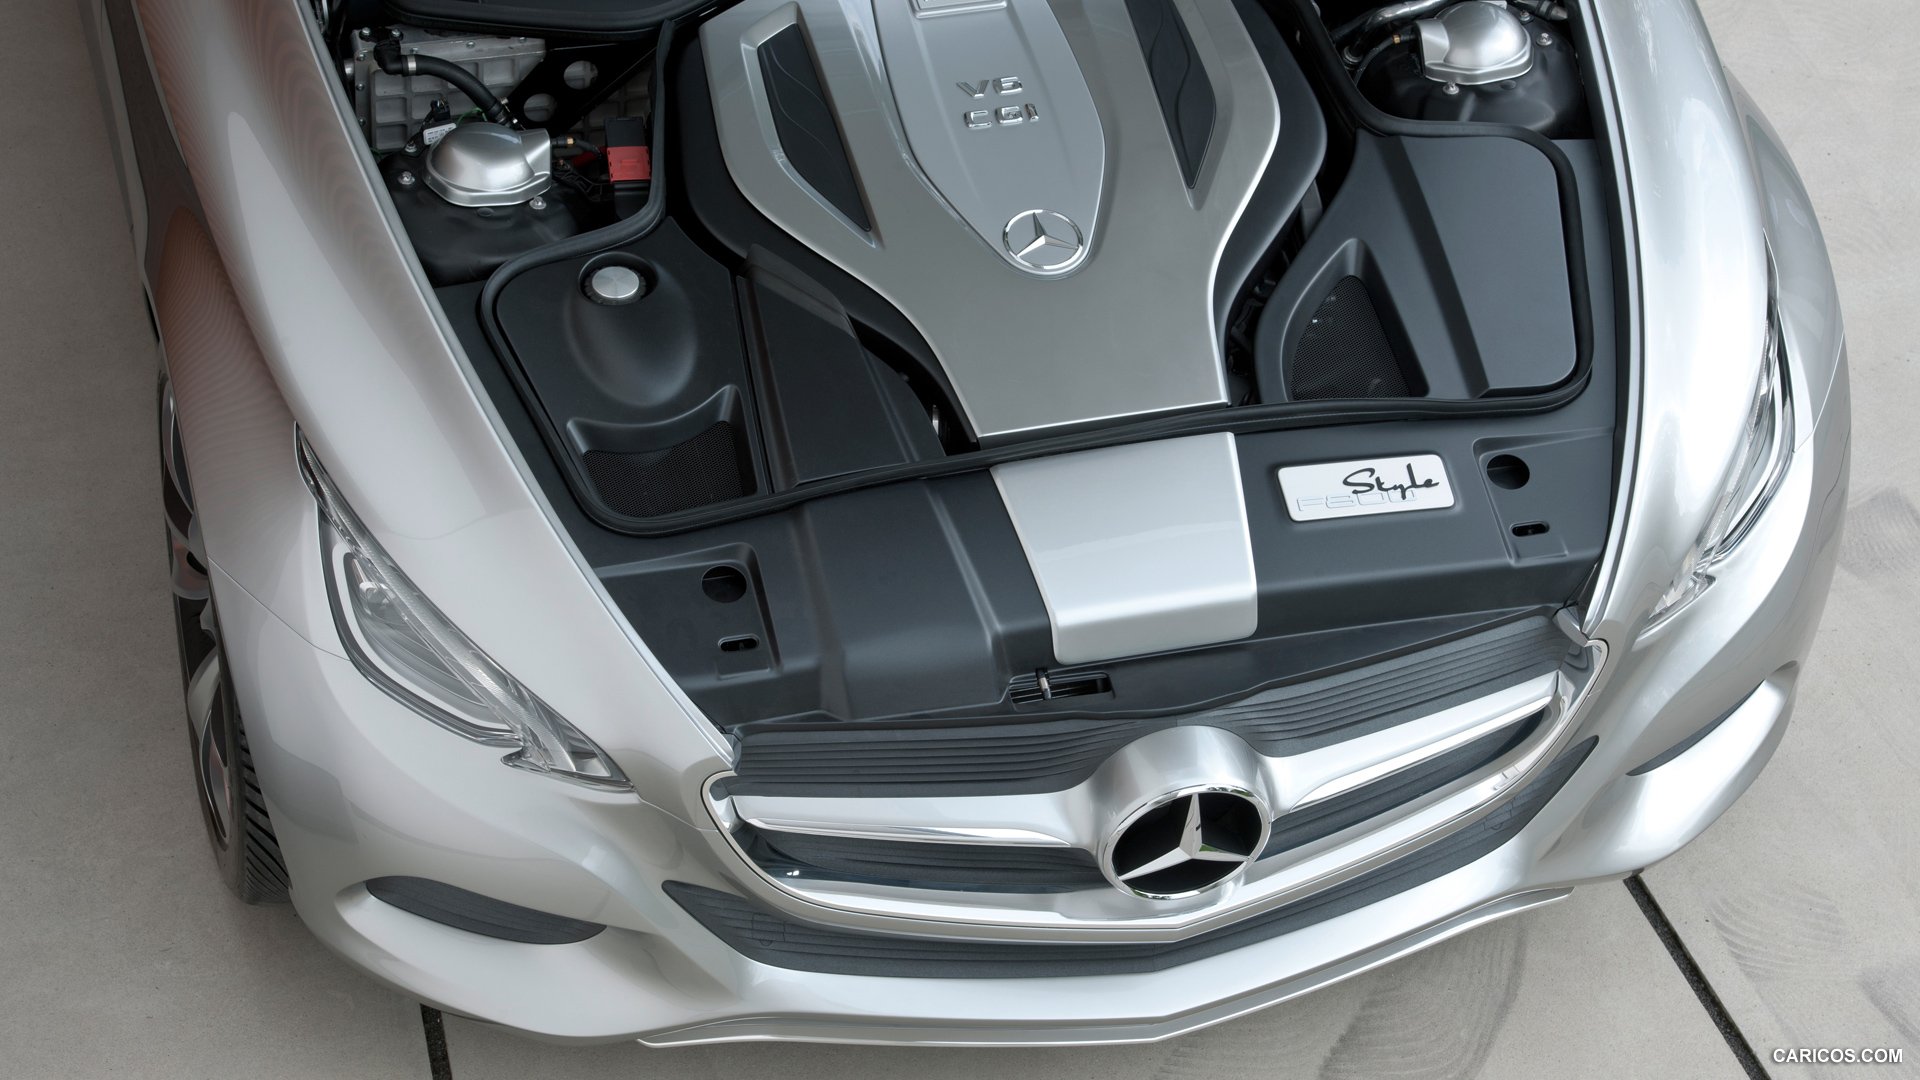 Mercedes-Benz F800 Style Concept (2010)  - Engine, #90 of 120